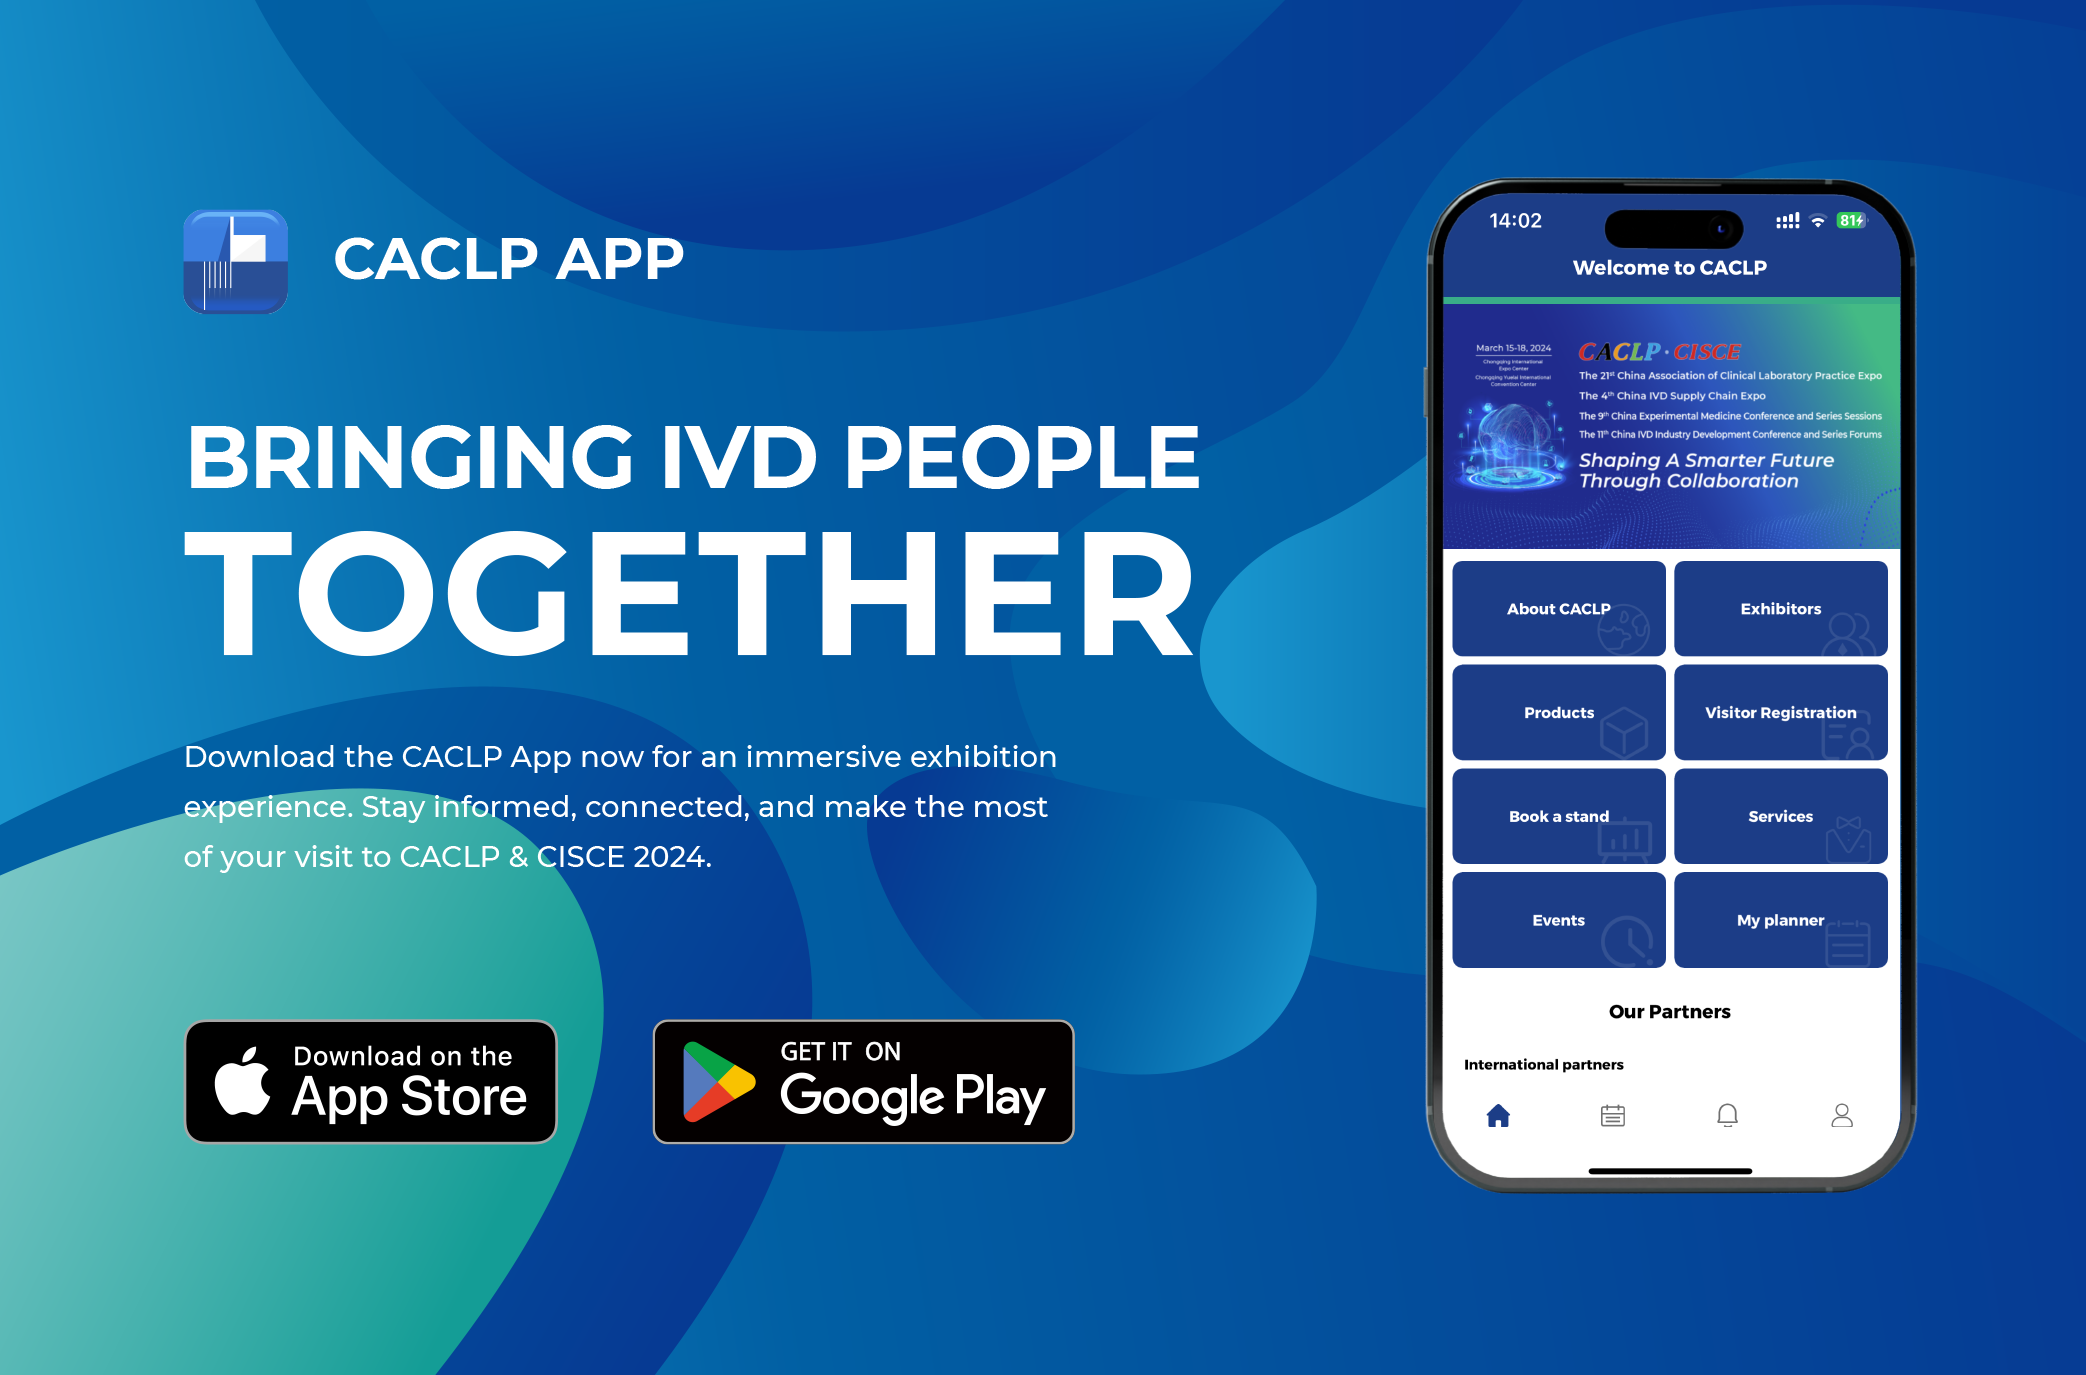 Ready to elevate your expo experience with CACLP APP?